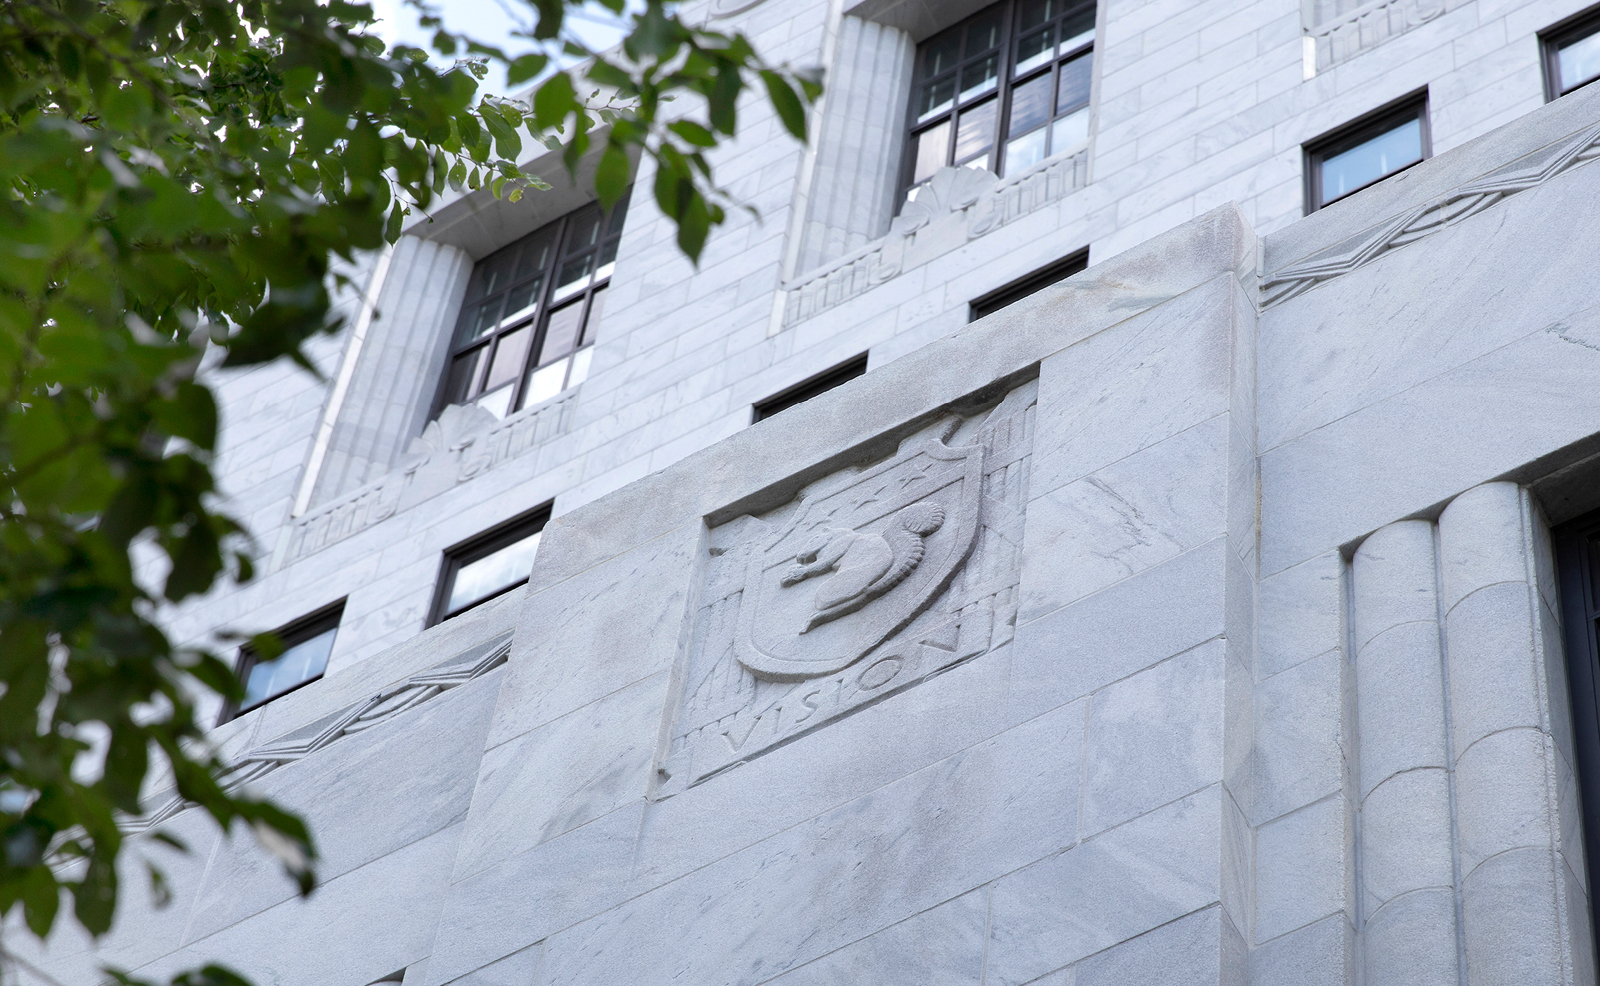 Image of a carving of a squirrel on the west side of the Thomas J. Moyer Ohio Judicial Center. Below the carving is the word 'Vision'